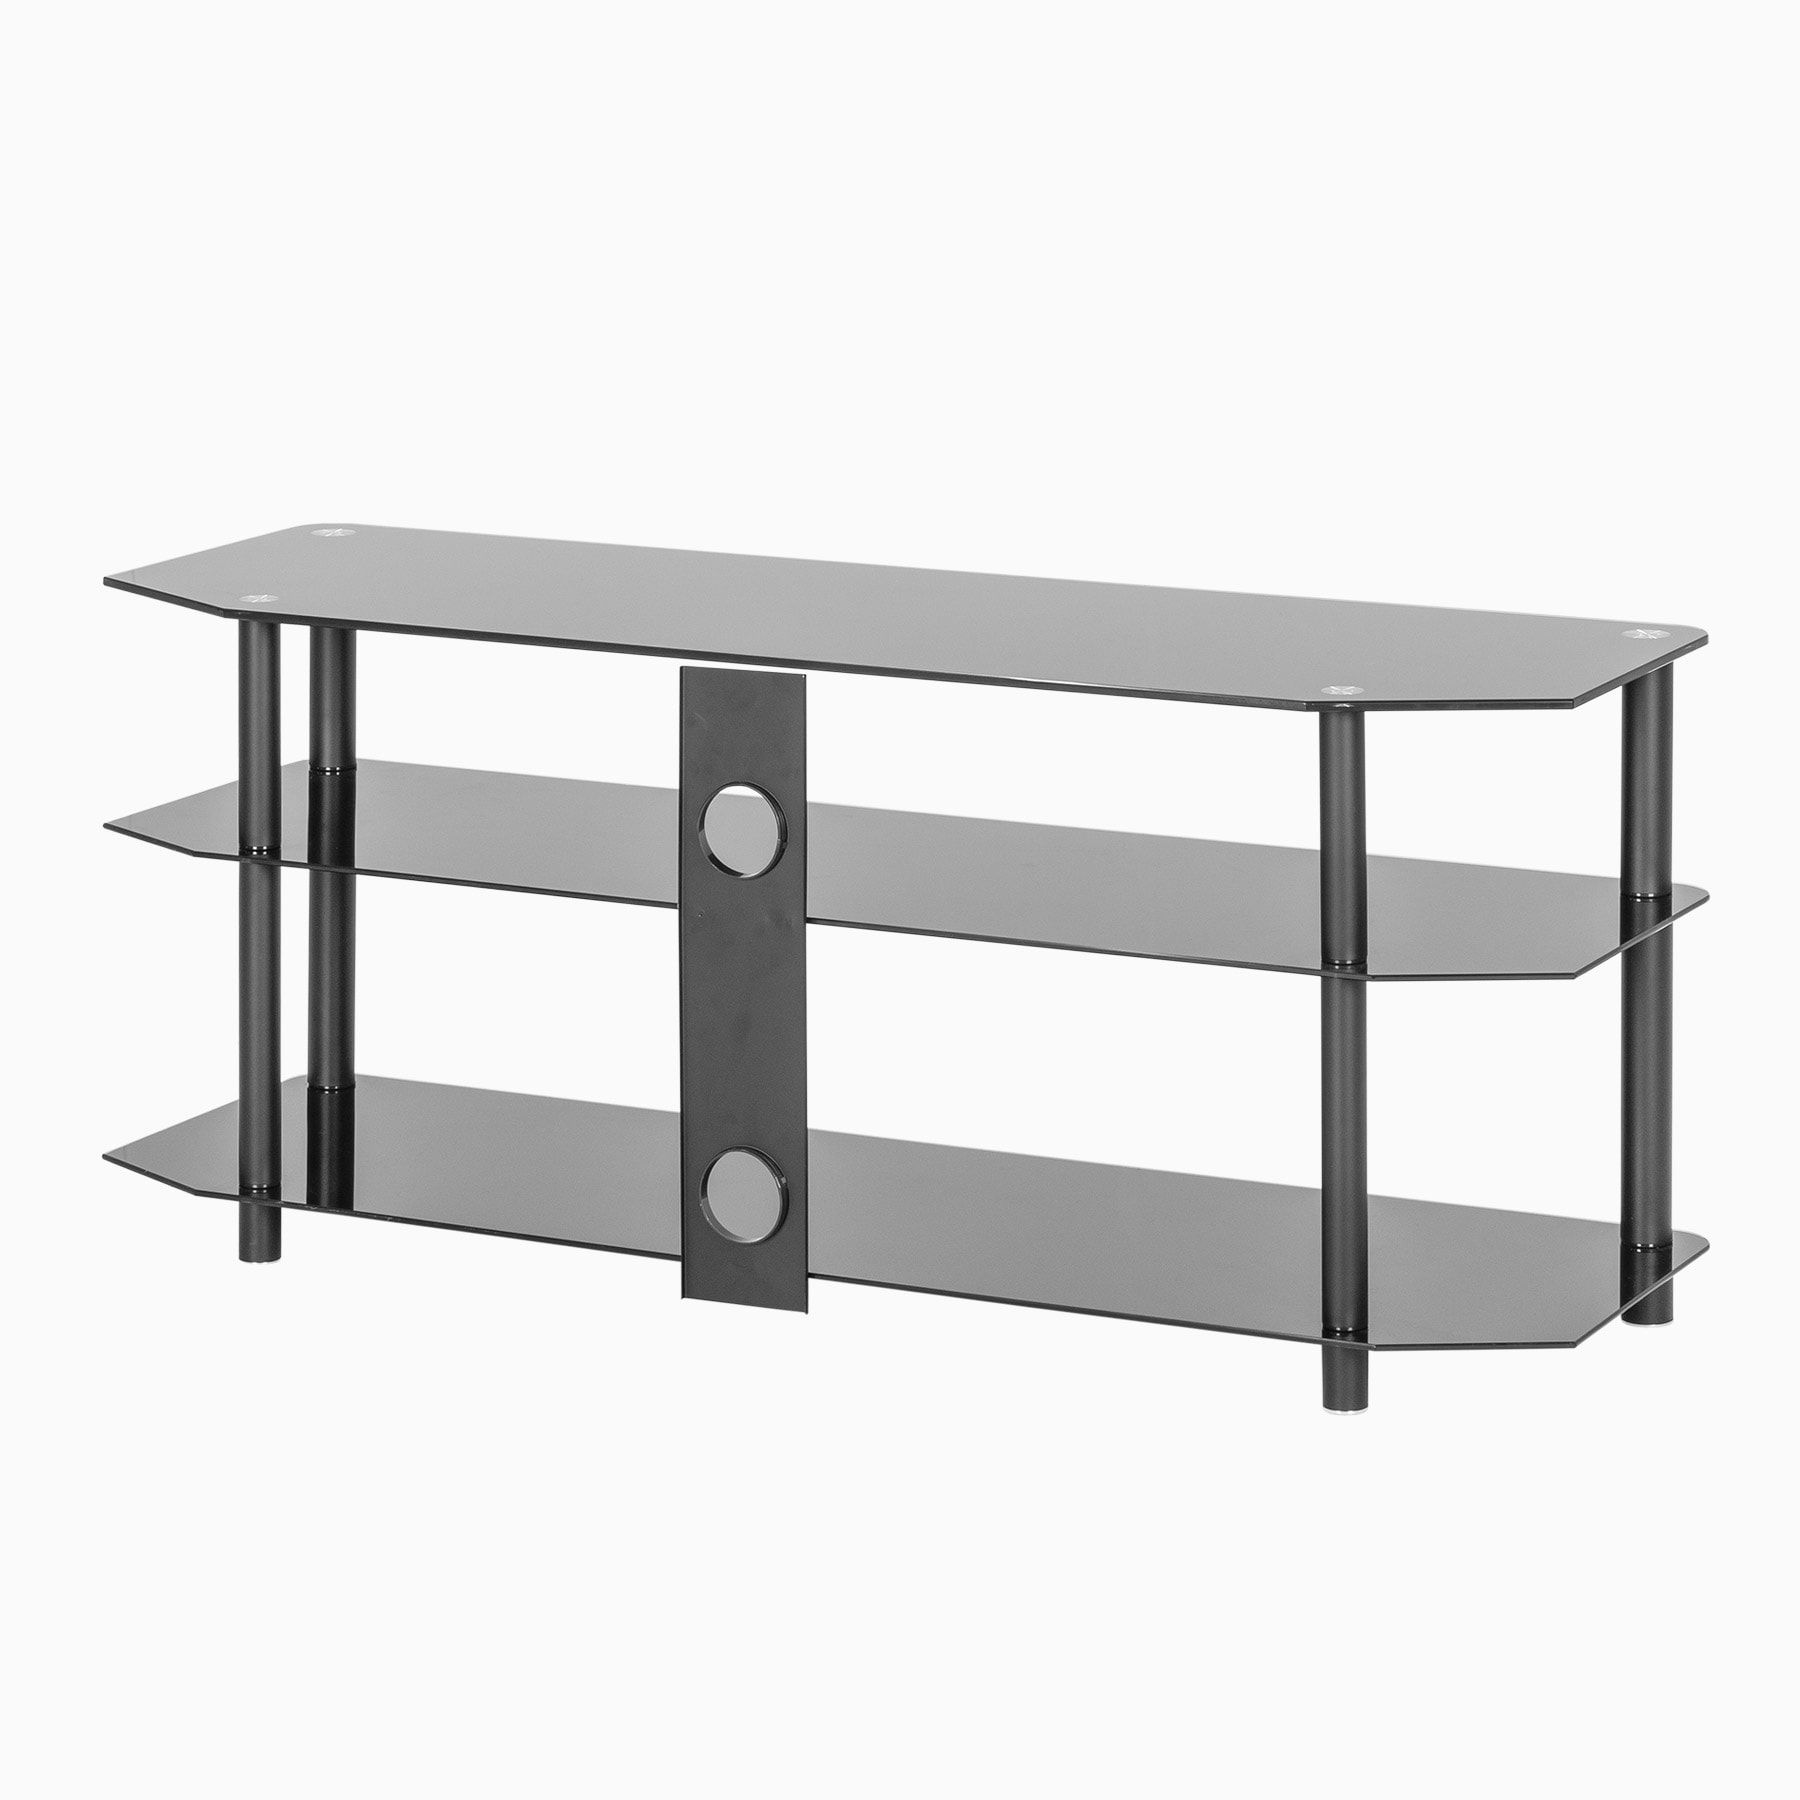 Black Glass Corner Tv Stand Up To 60 Inch Tv | Mmt Zgbb1200 In Glass Shelves Tv Stands For Tvs Up To 50" (View 8 of 15)